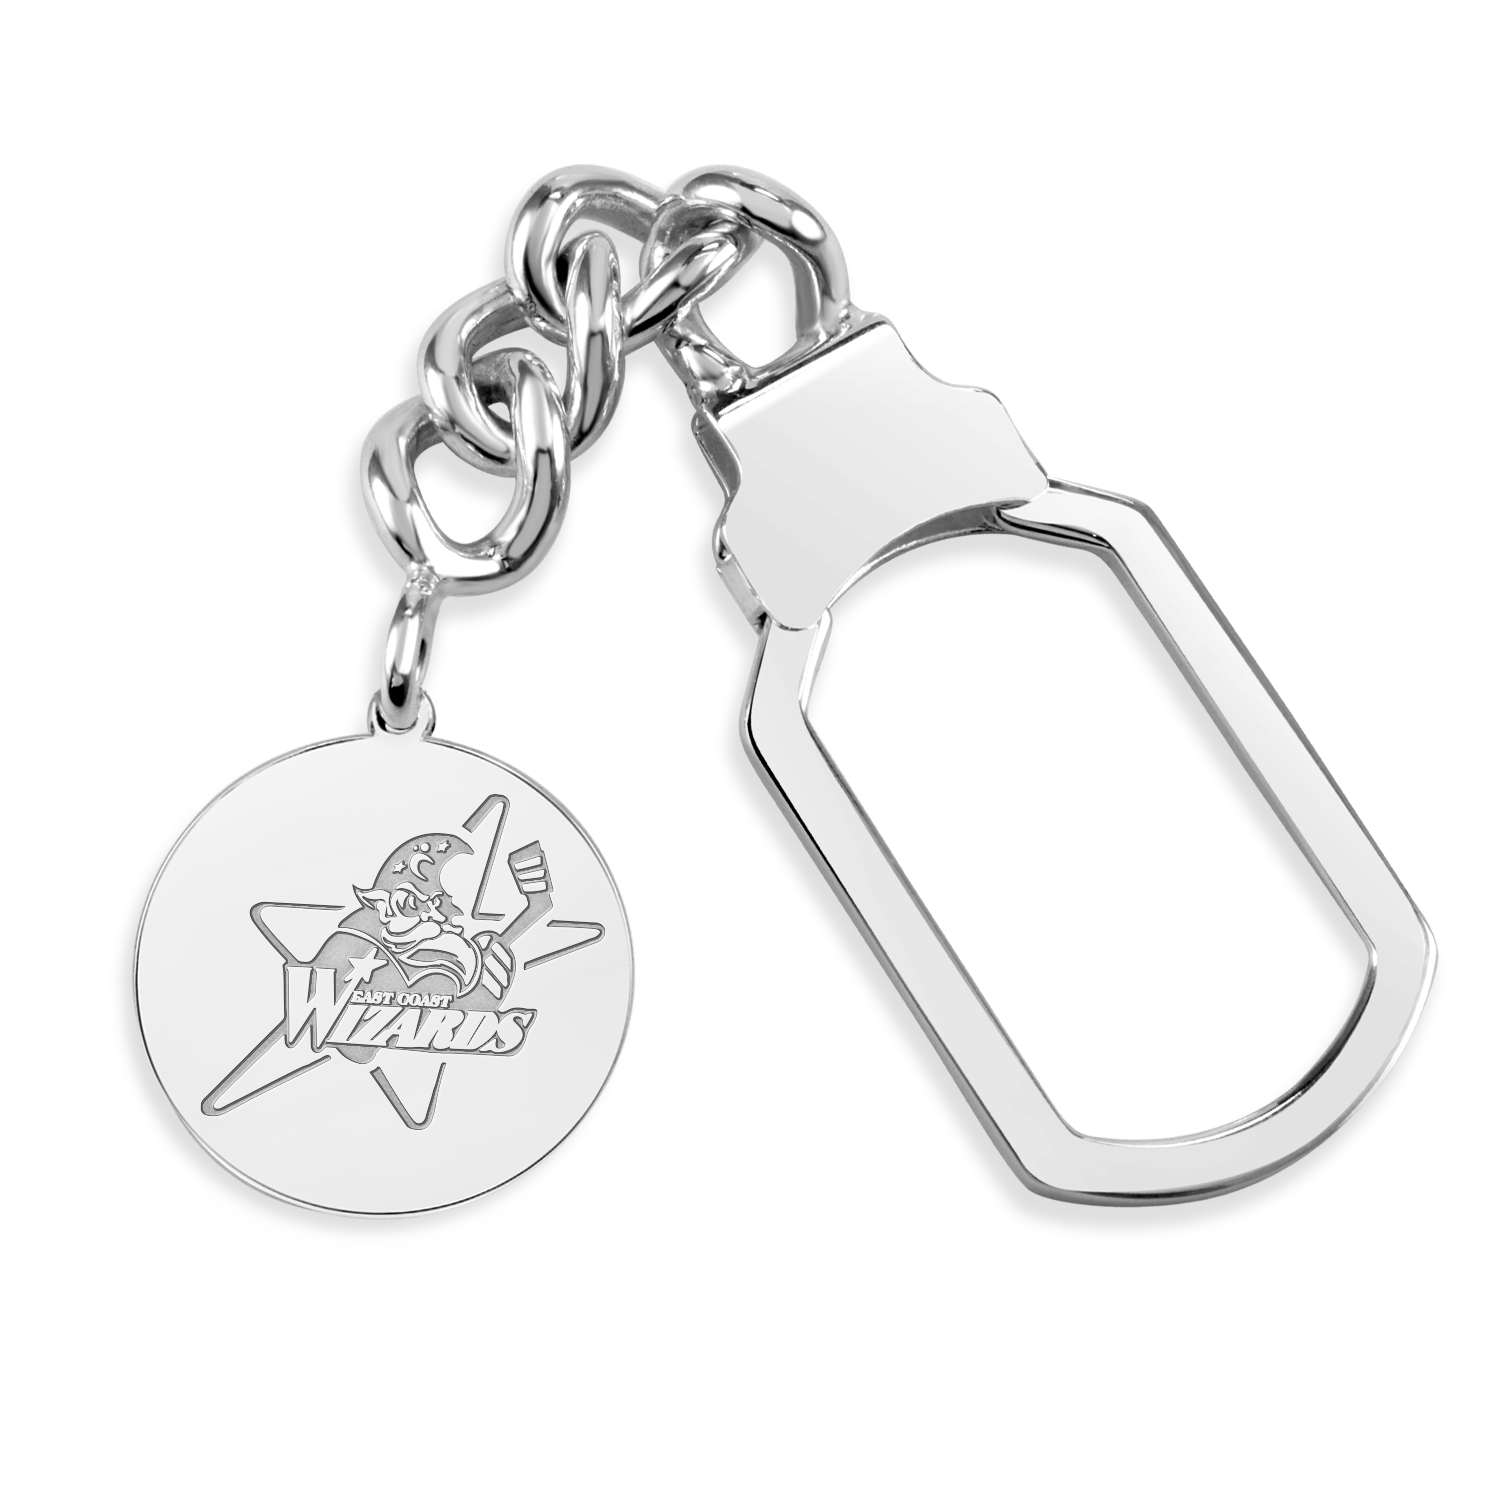 East Coast Wizards Disc Tension Key Chain